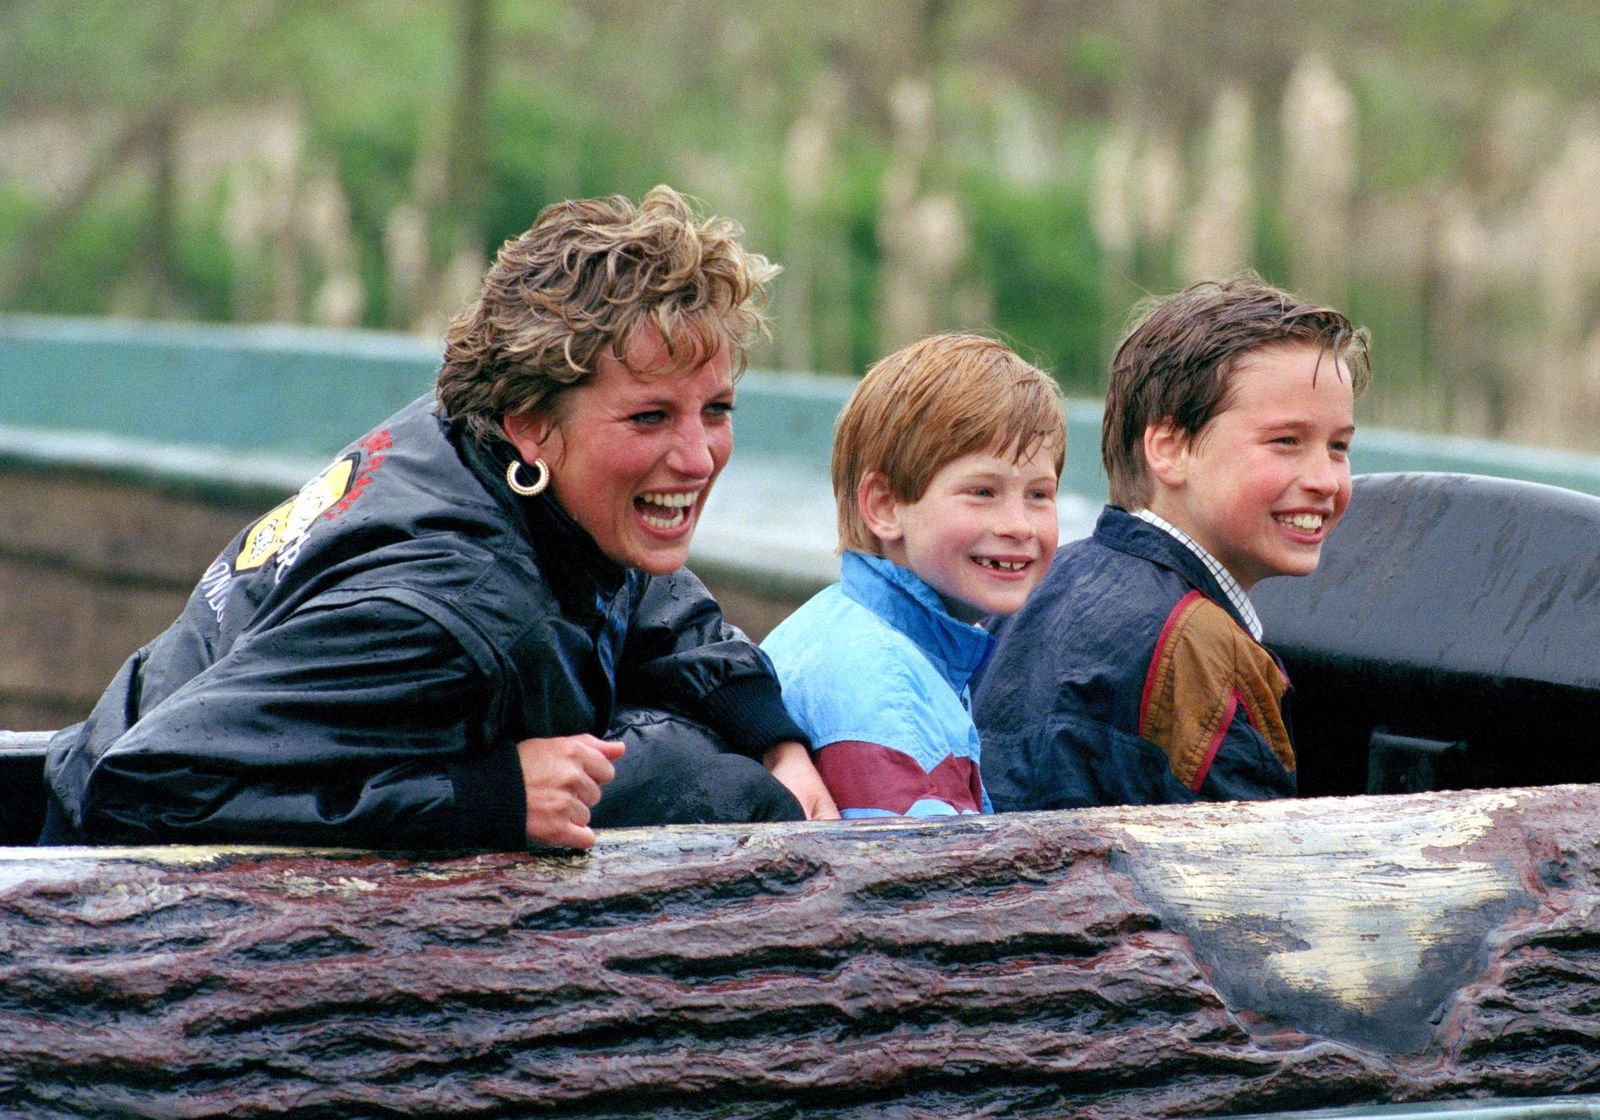 Princess Diana, Prince William, and\u00a0Prince Harry at The "Thorpe Park"\u00a0Amusement Park on April 13, 1993 | Source: Getty Images